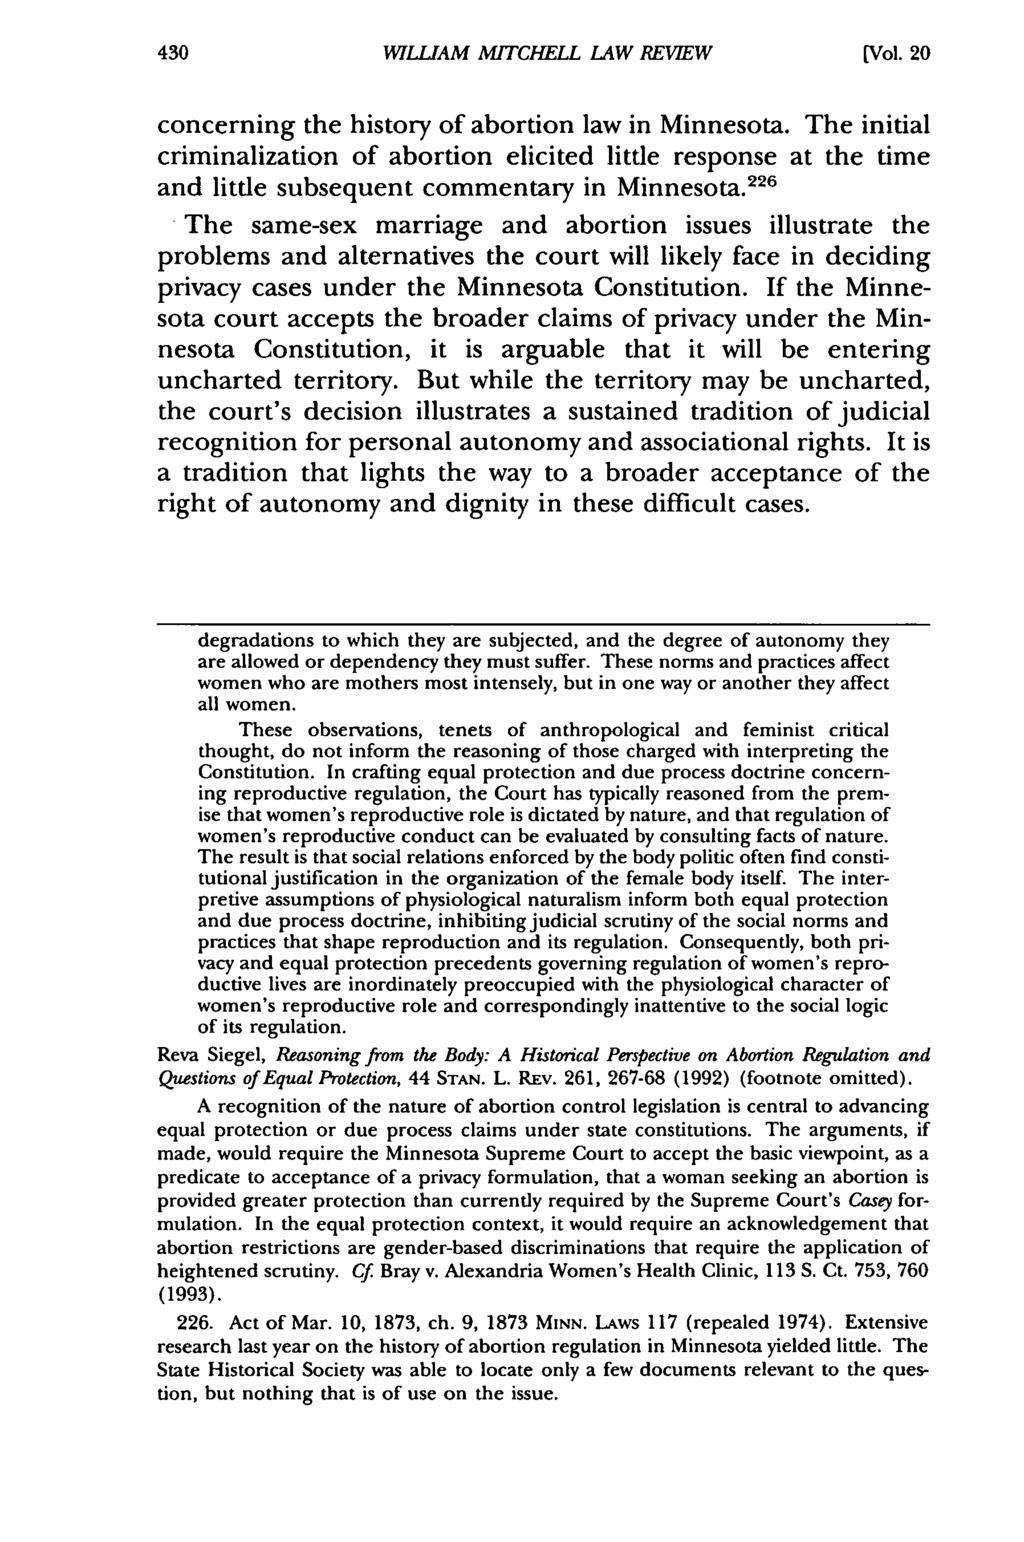 William Mitchell Law Review, Vol. 20, Iss. 2 [1994], Art. 6 http://open.